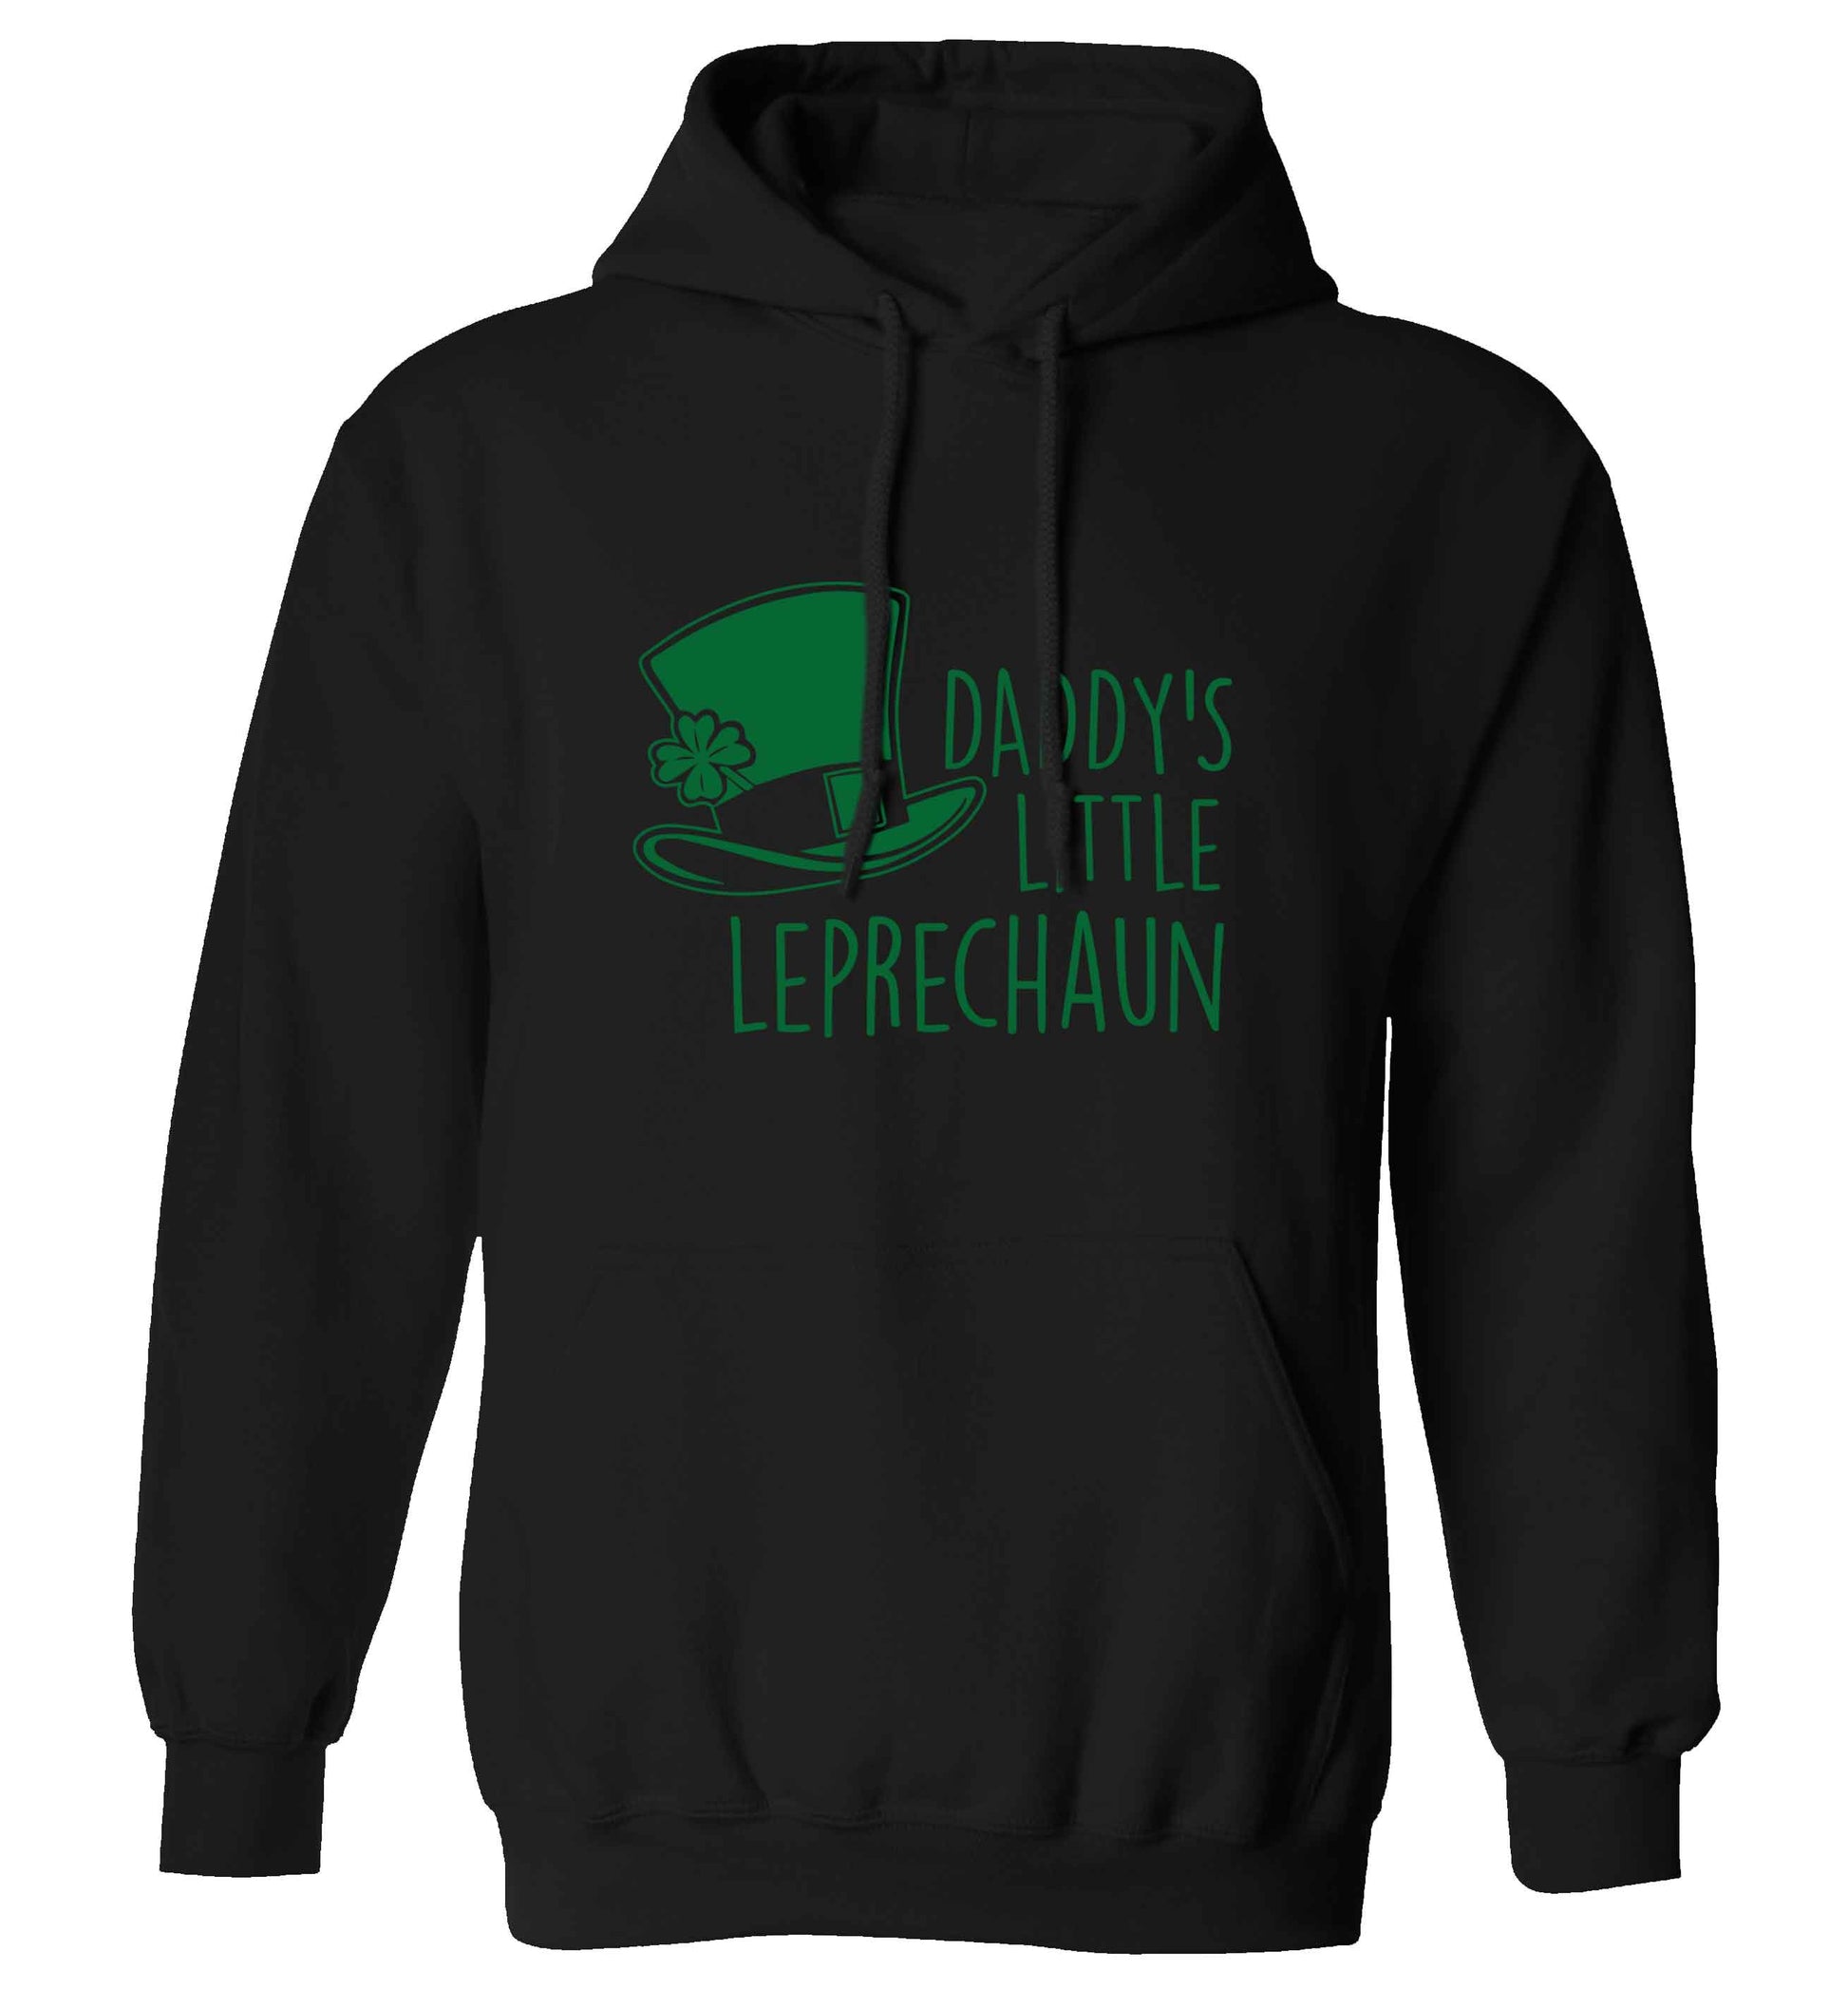 Daddy's lucky charm adults unisex black hoodie 2XL